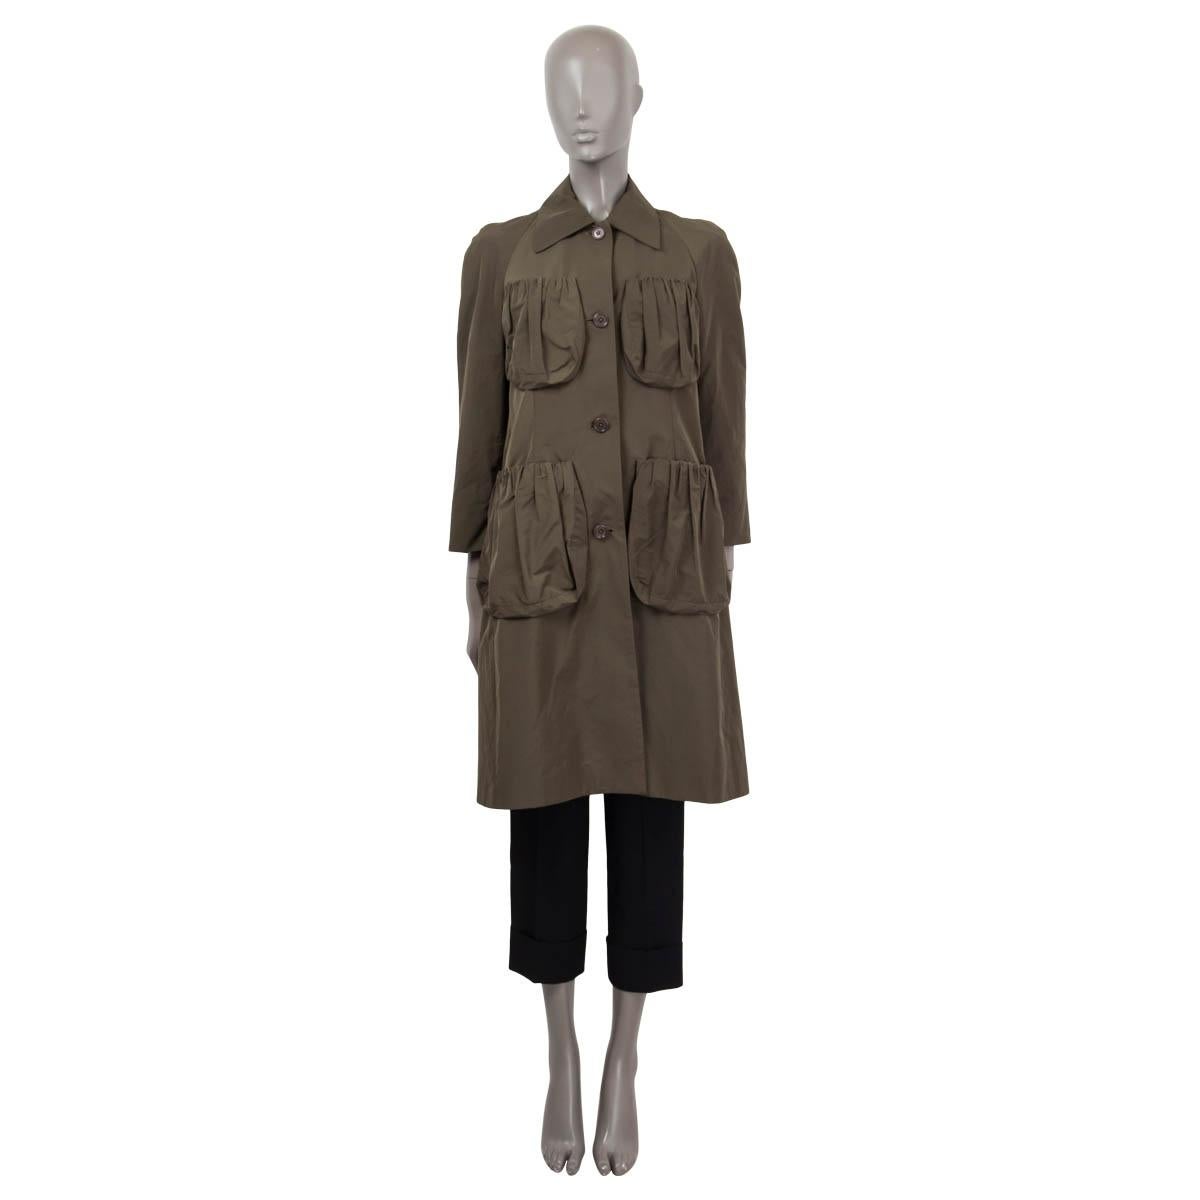 100% authentic Dries van Noten 'Shell' coat in green polyester (58%) and cotton (42%). Features four patch pockets on the front and 3/4 raglan sleeves (sleeve measurements taken from the neck). Opens with buttons on the front. Lined in green viscose